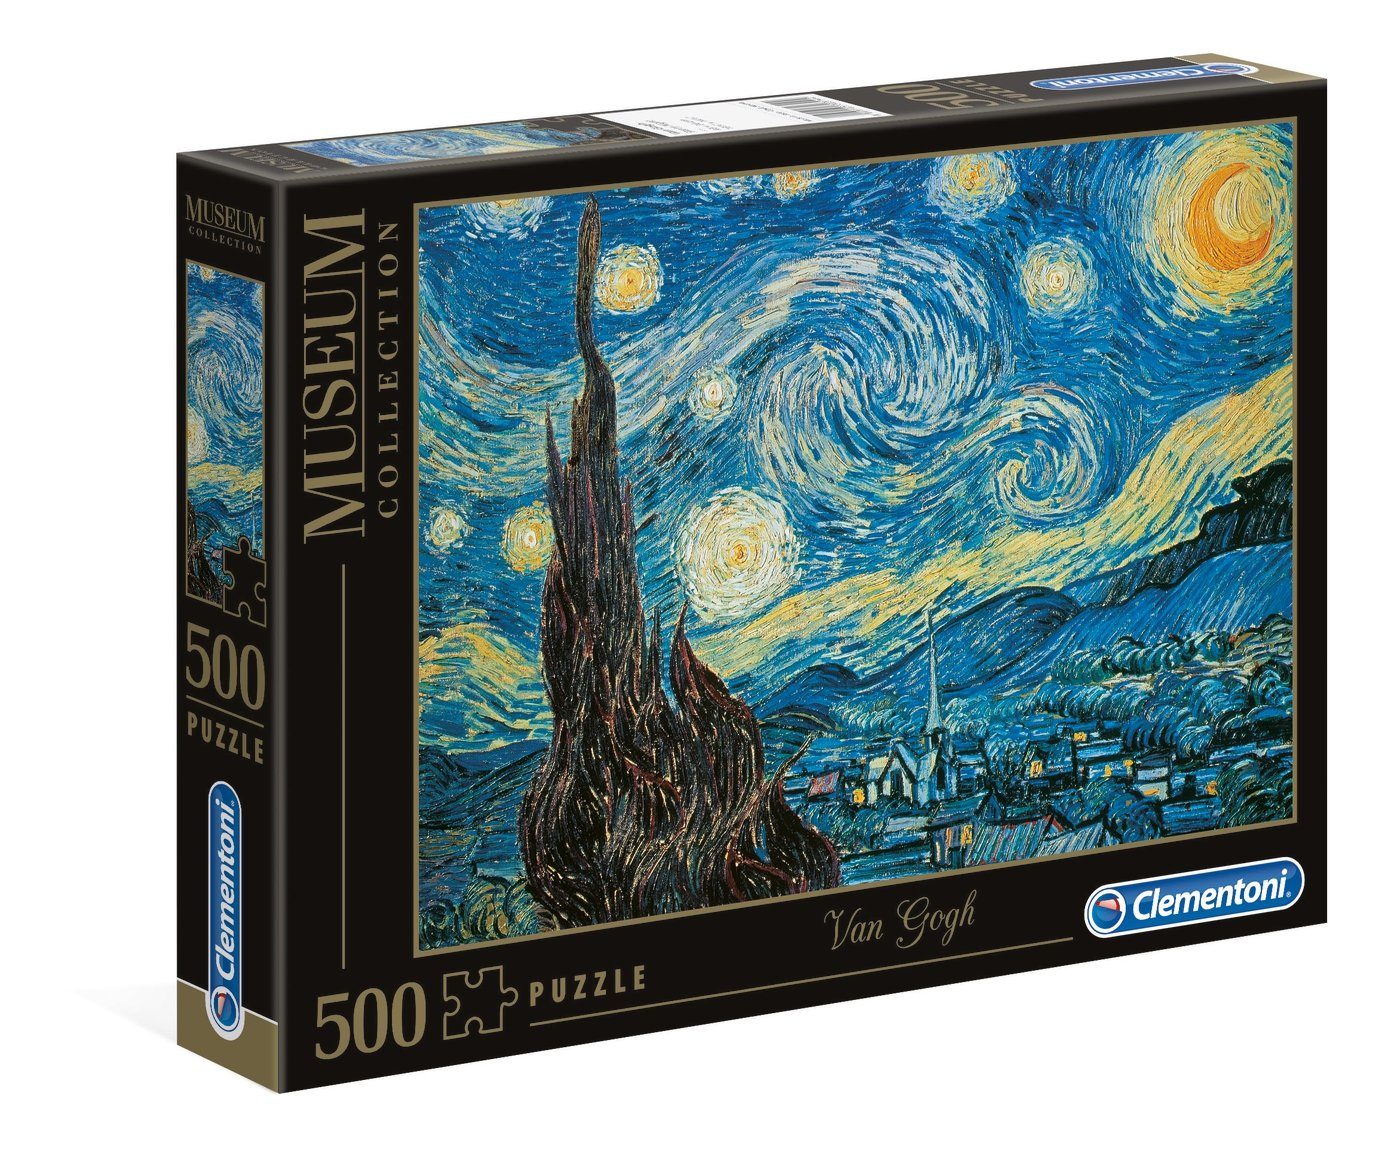 Puzzle Museum Collection van Gogh Starry Night 500 Teile, 500 Puzzleteile